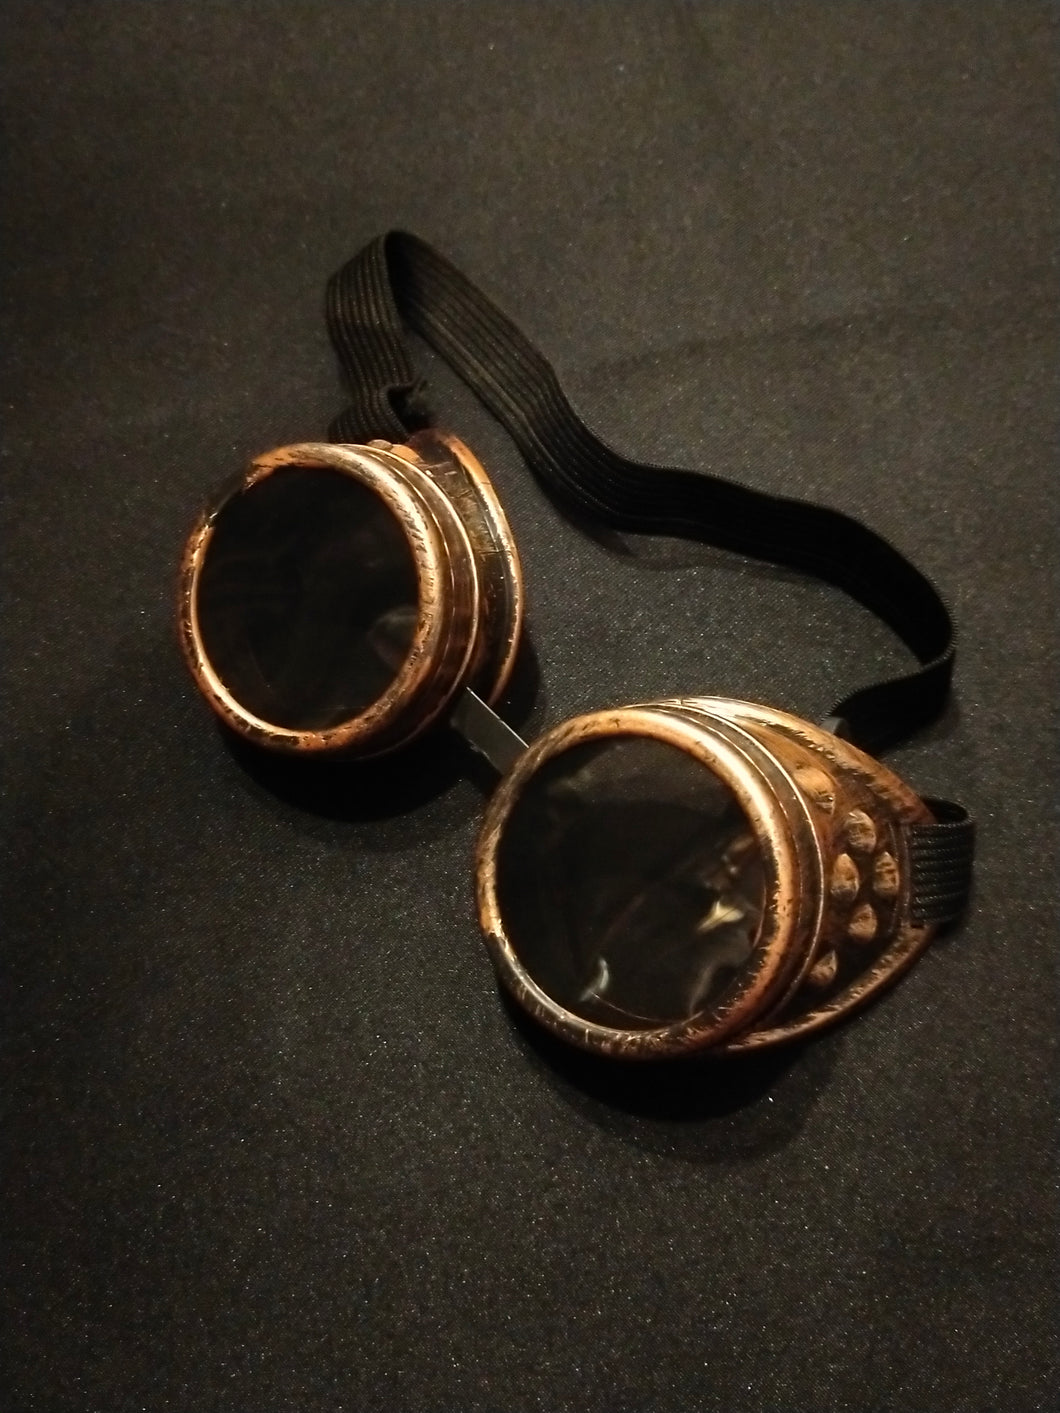 Steam punk goggles glasses welding gothic cosplay